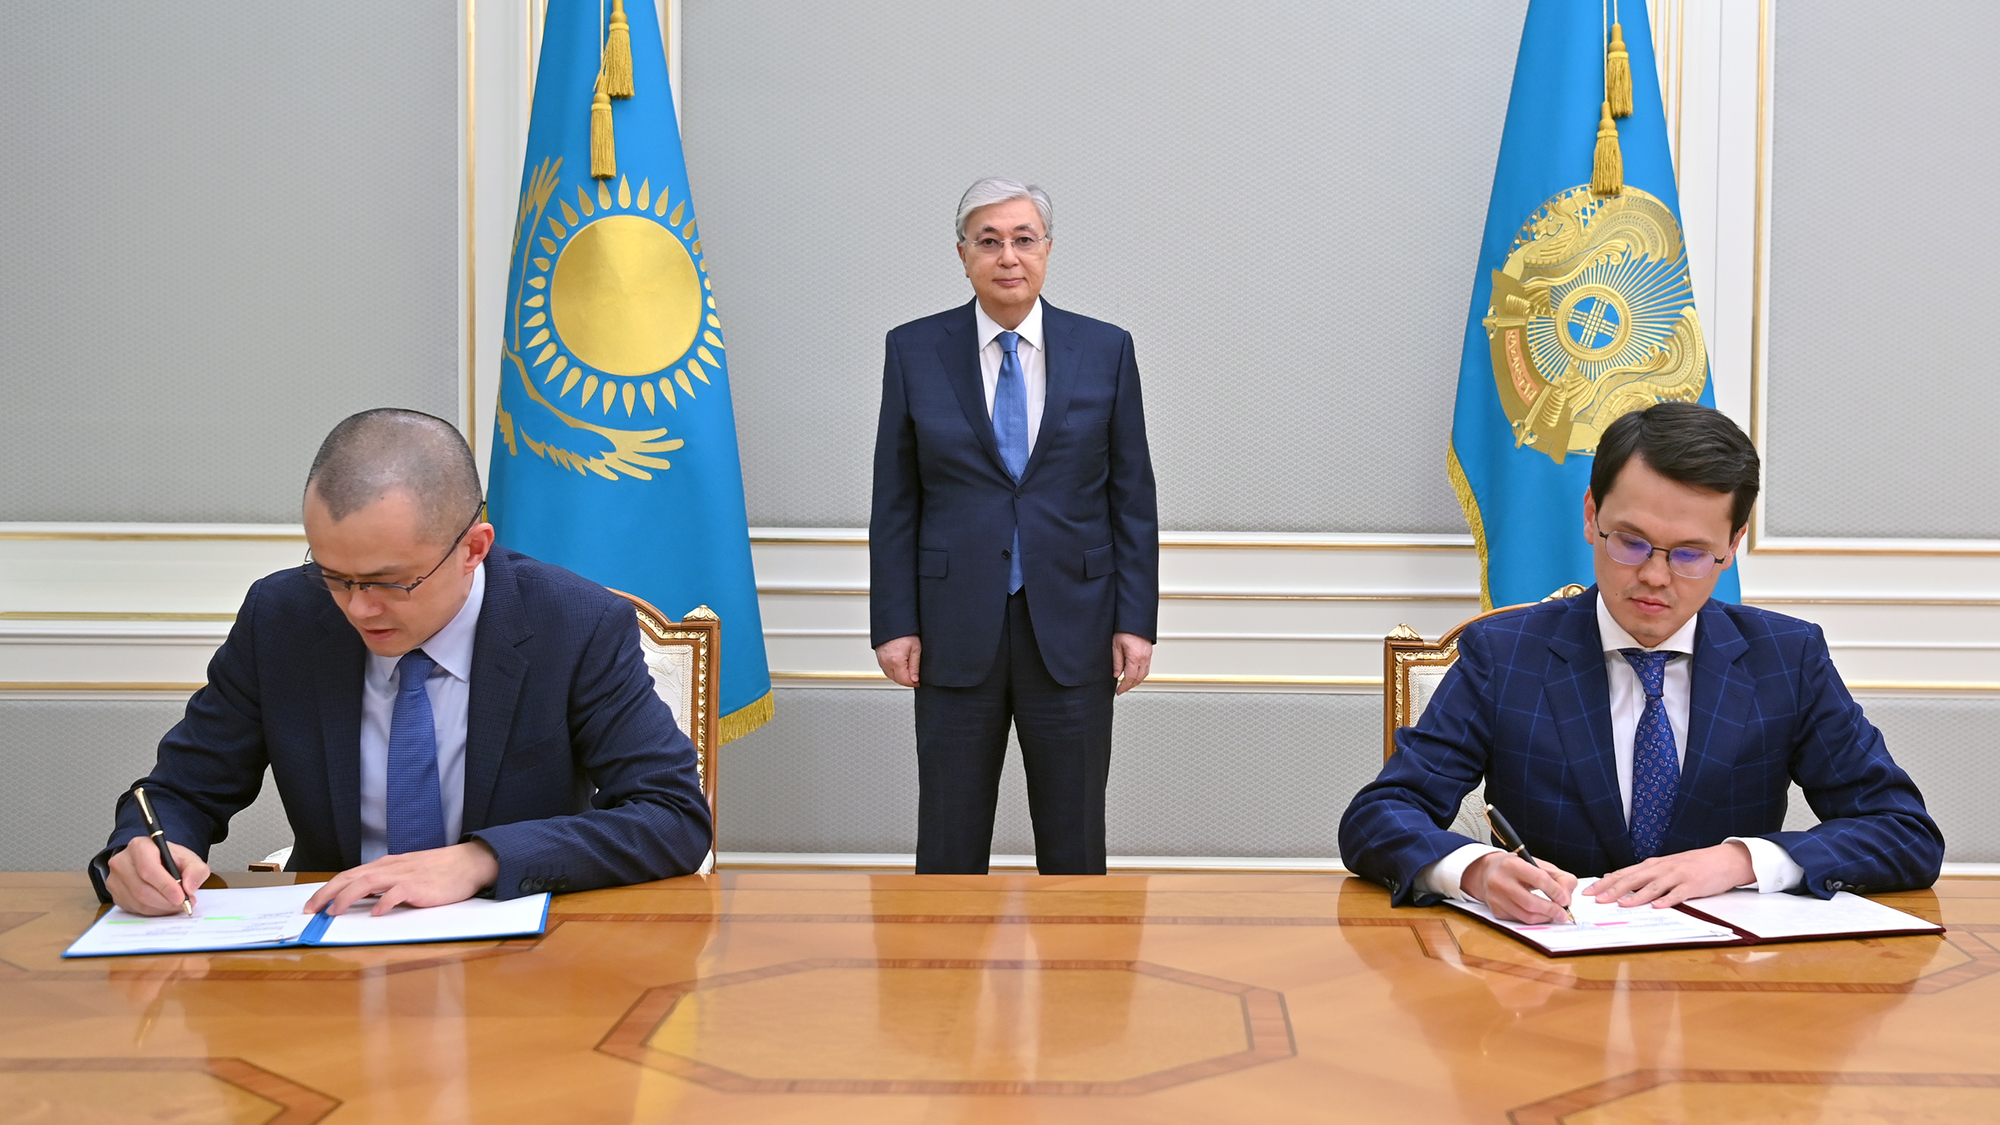 The Ministry of Digital Development, Innovation and Aerospace Industry and Binance signed a Memorandum on Cooperation in the presence of President President Tokayev